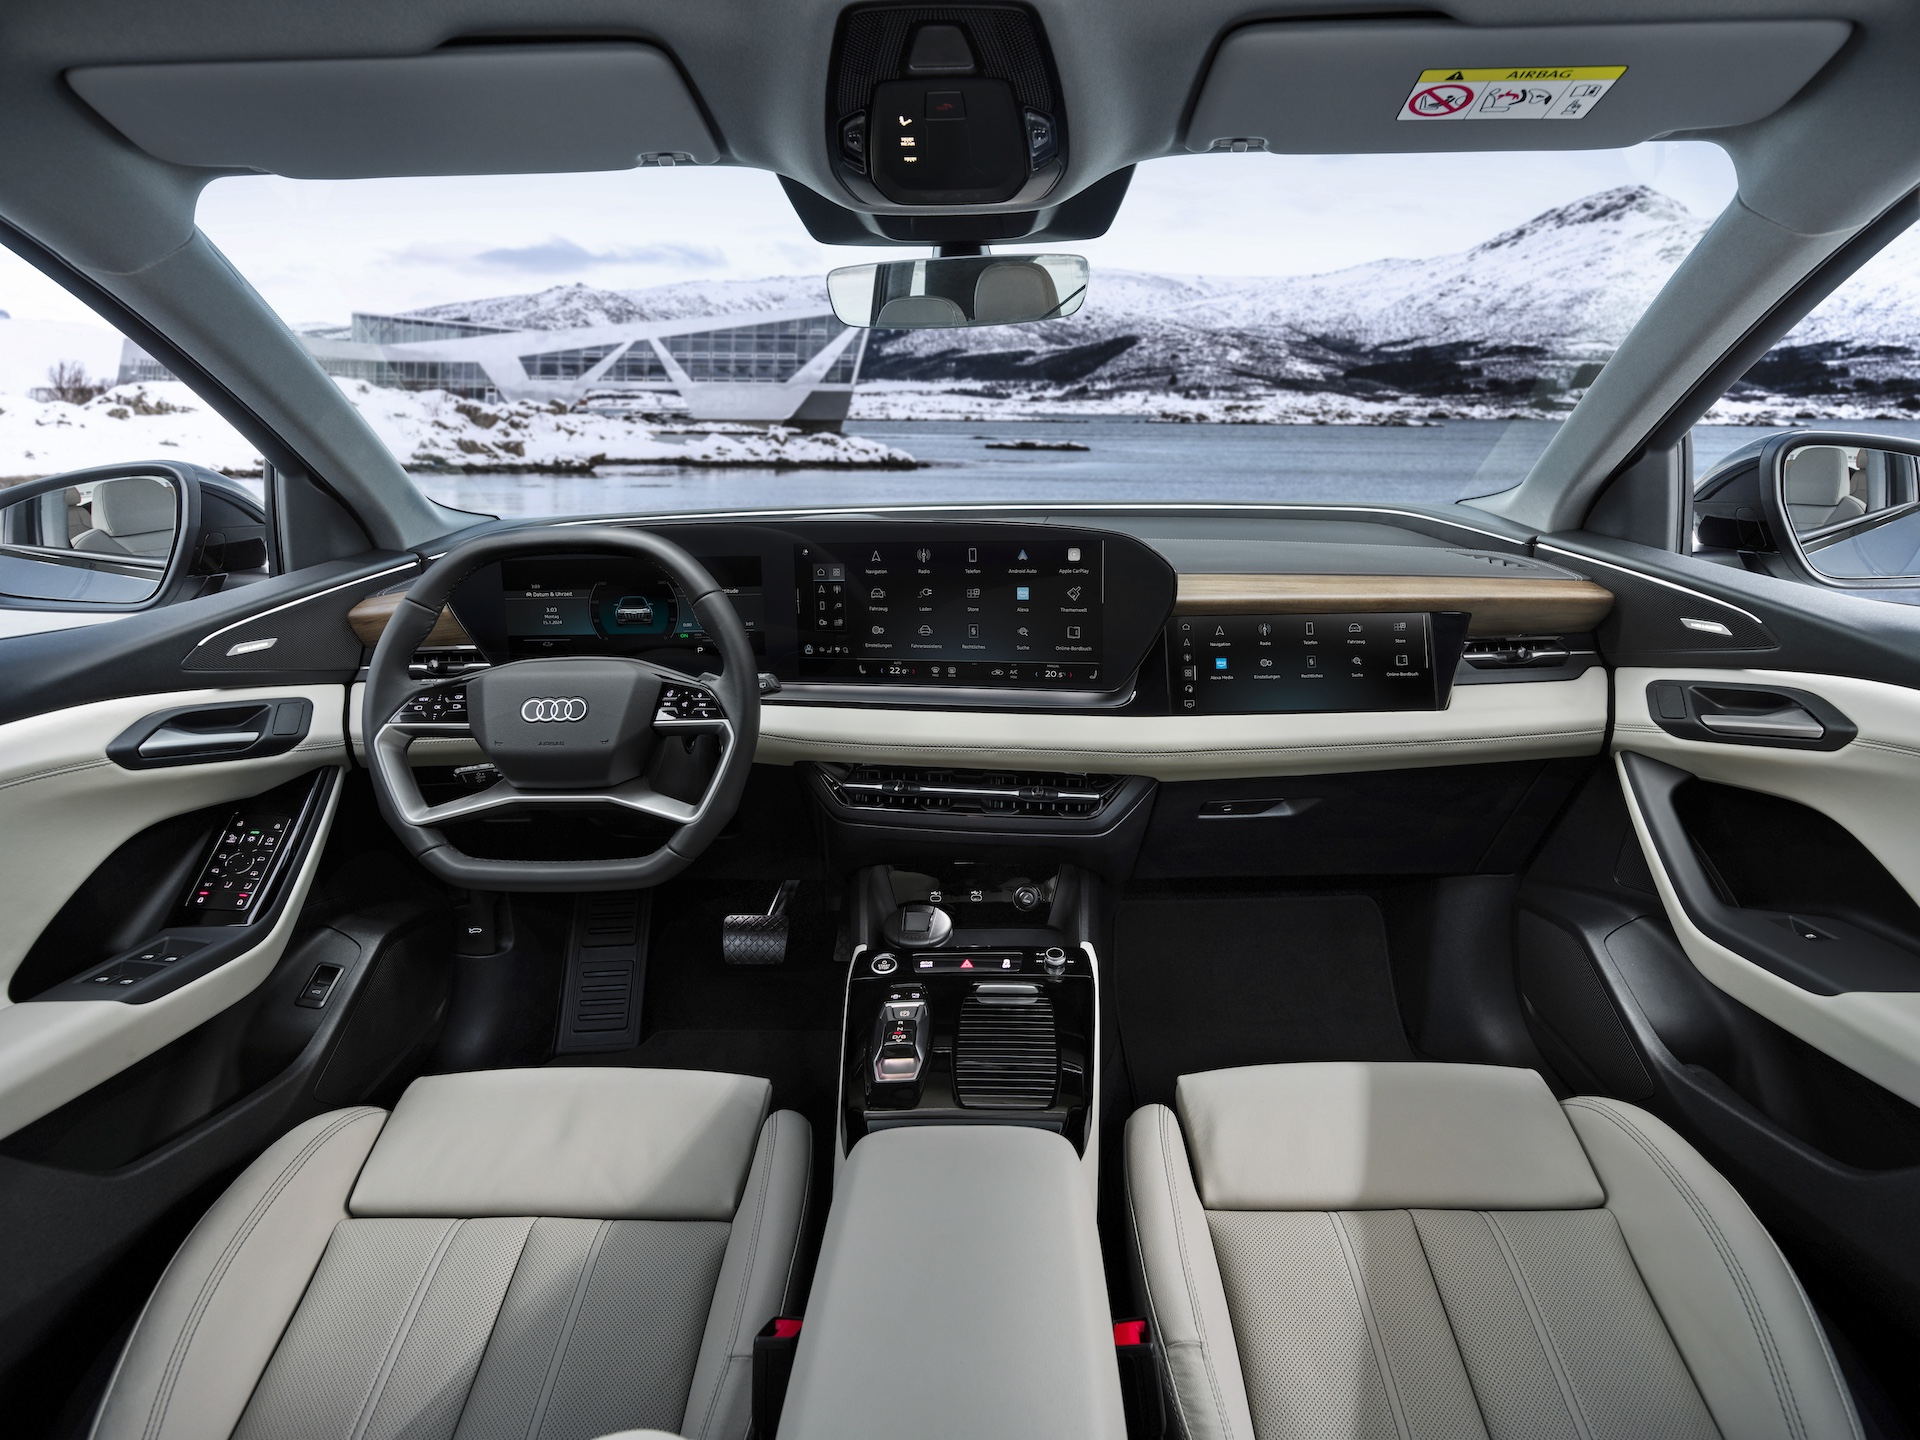 Audi brings ChatGPT AI to vehicles as old as 2021 Auto Recent